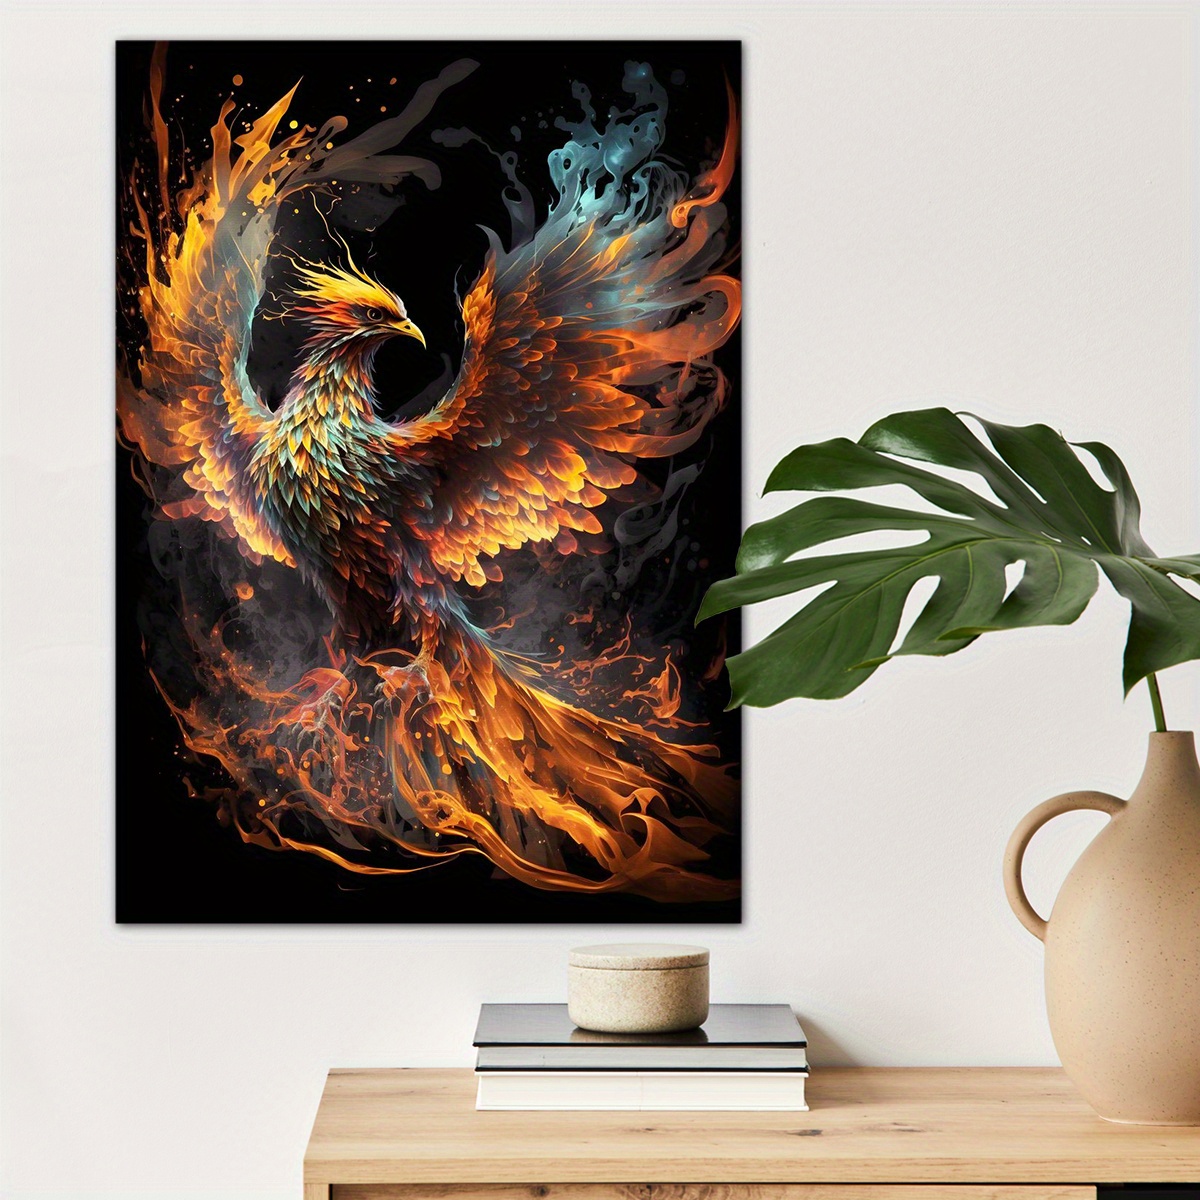 

1pc Fantasy Fire Phoenix Canvas Wall Art For Home Decor, High Quality Wall Decor, Canvas Prints For Living Room Bedroom Bathroom Kitchen Office Cafe Decor, Perfect Gift And Decoration